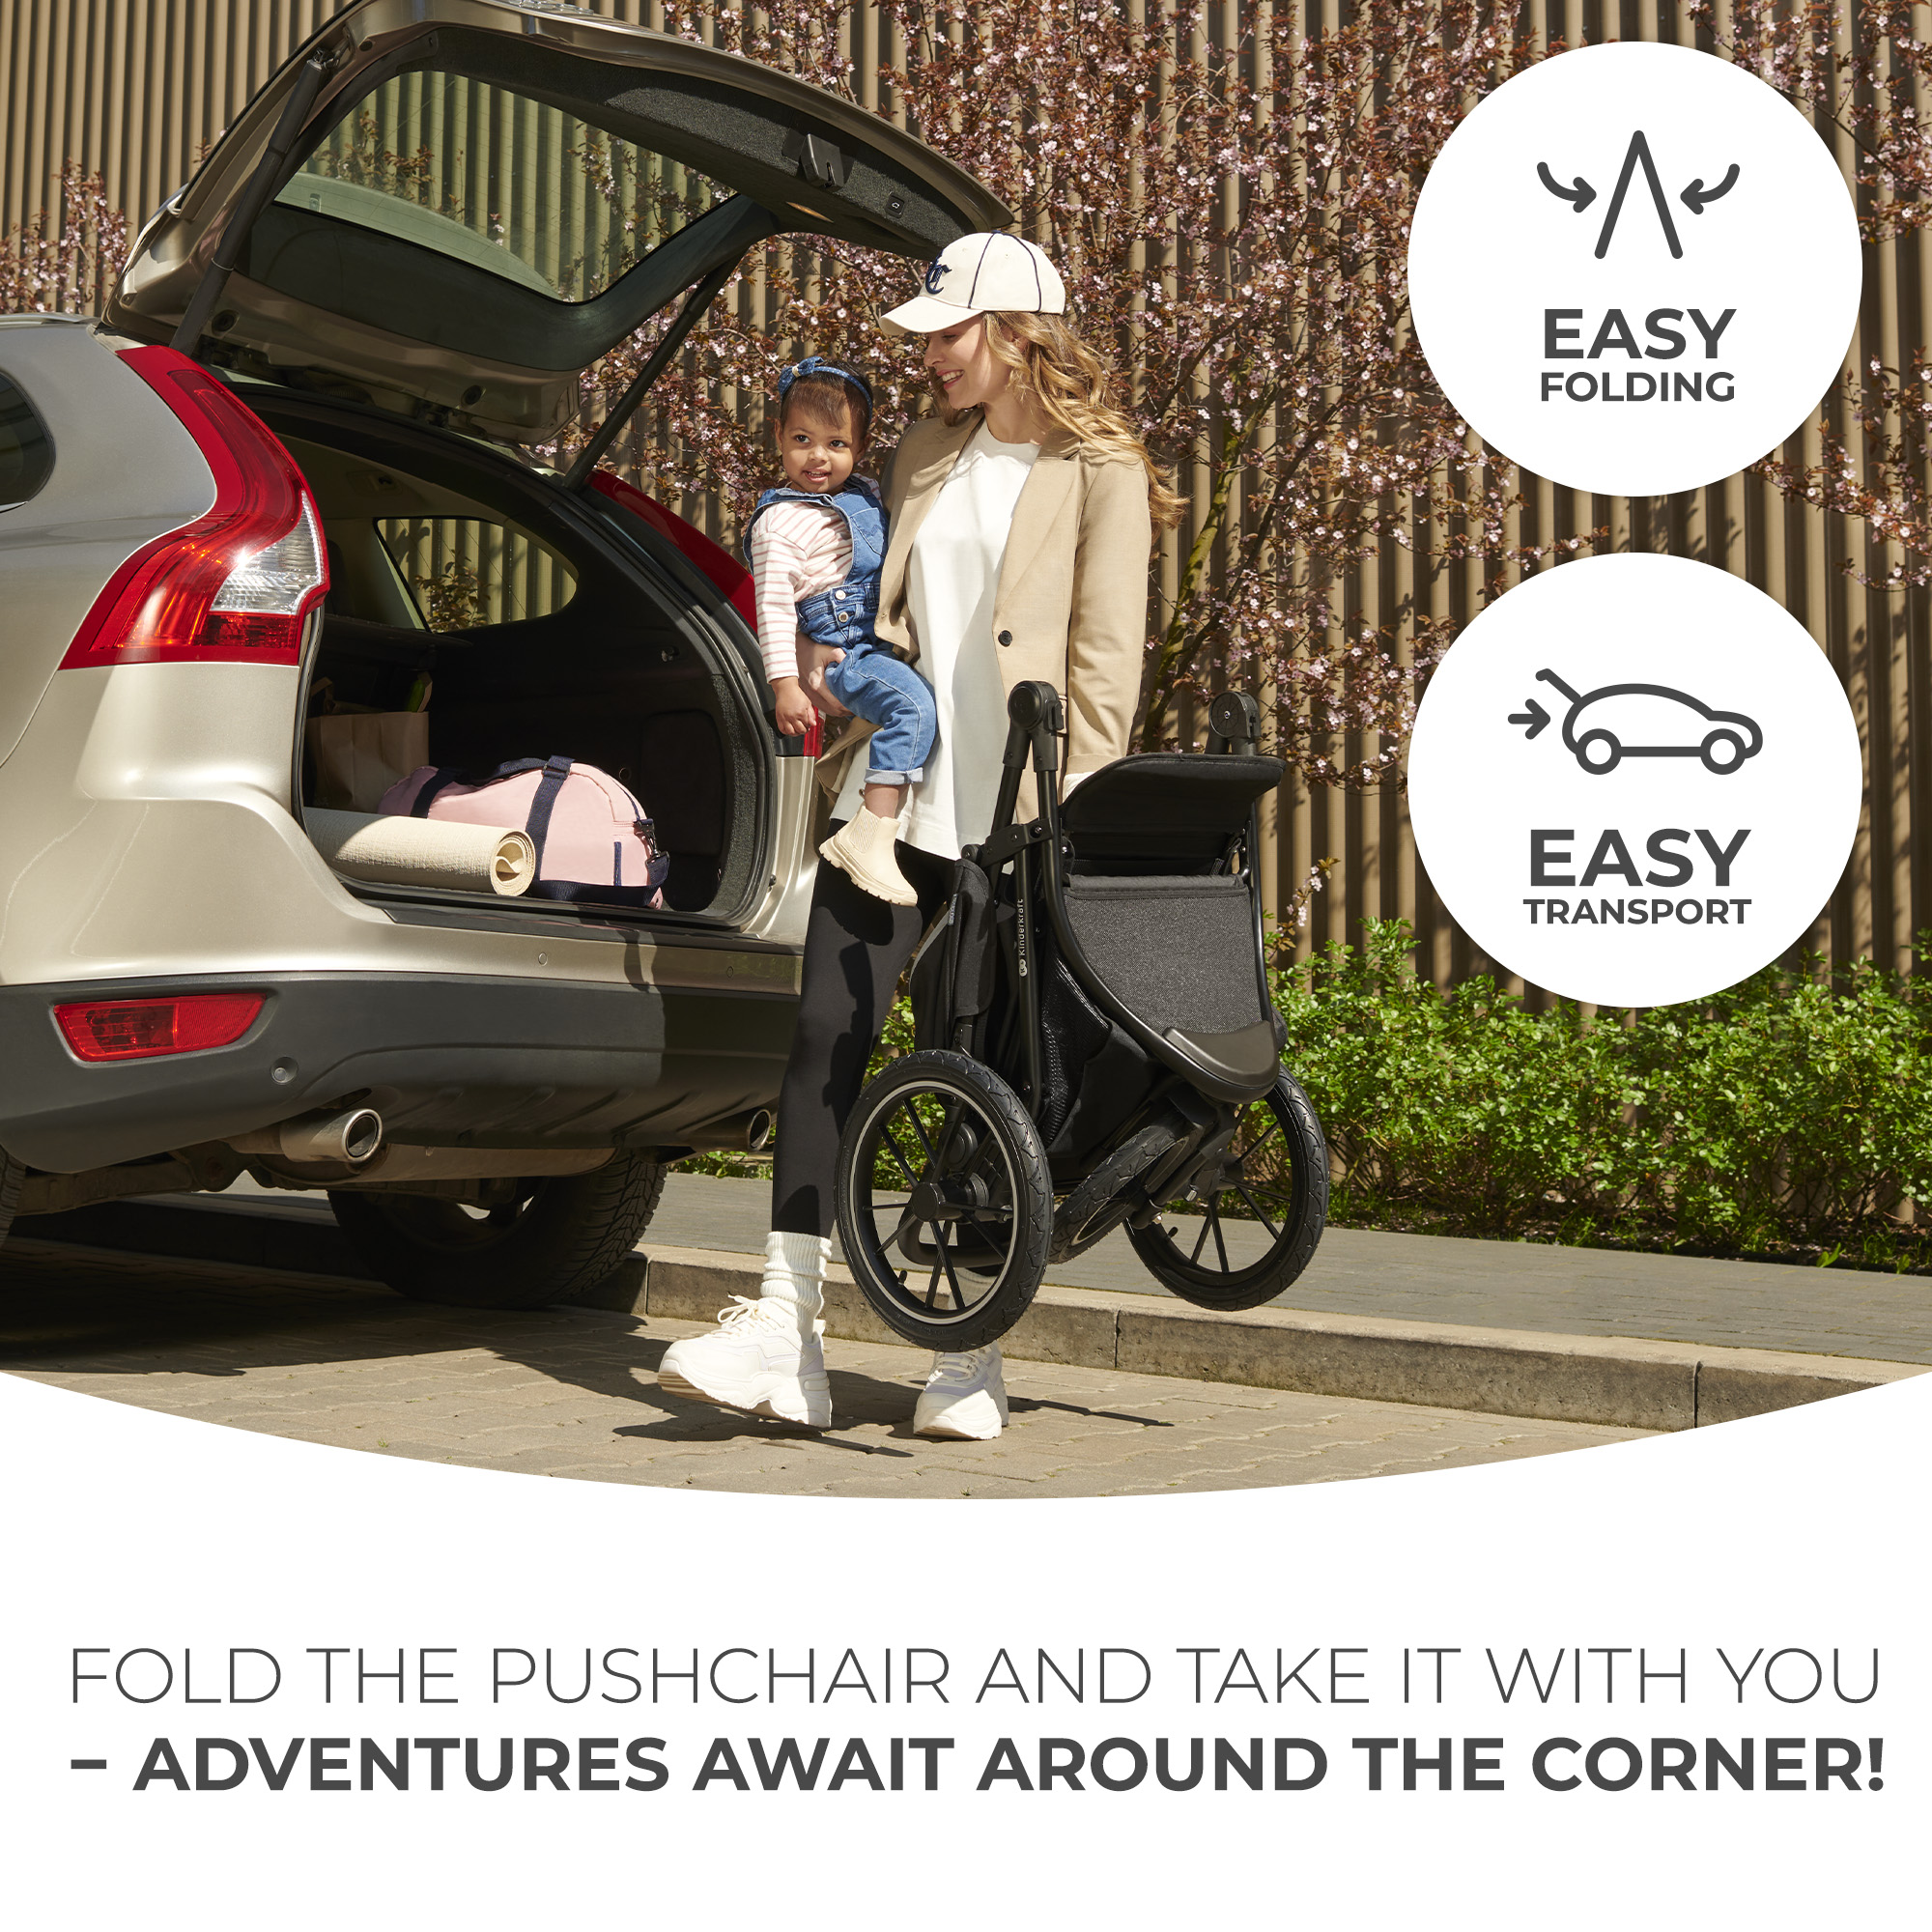  HELSI -  pushchair for active lifestyle